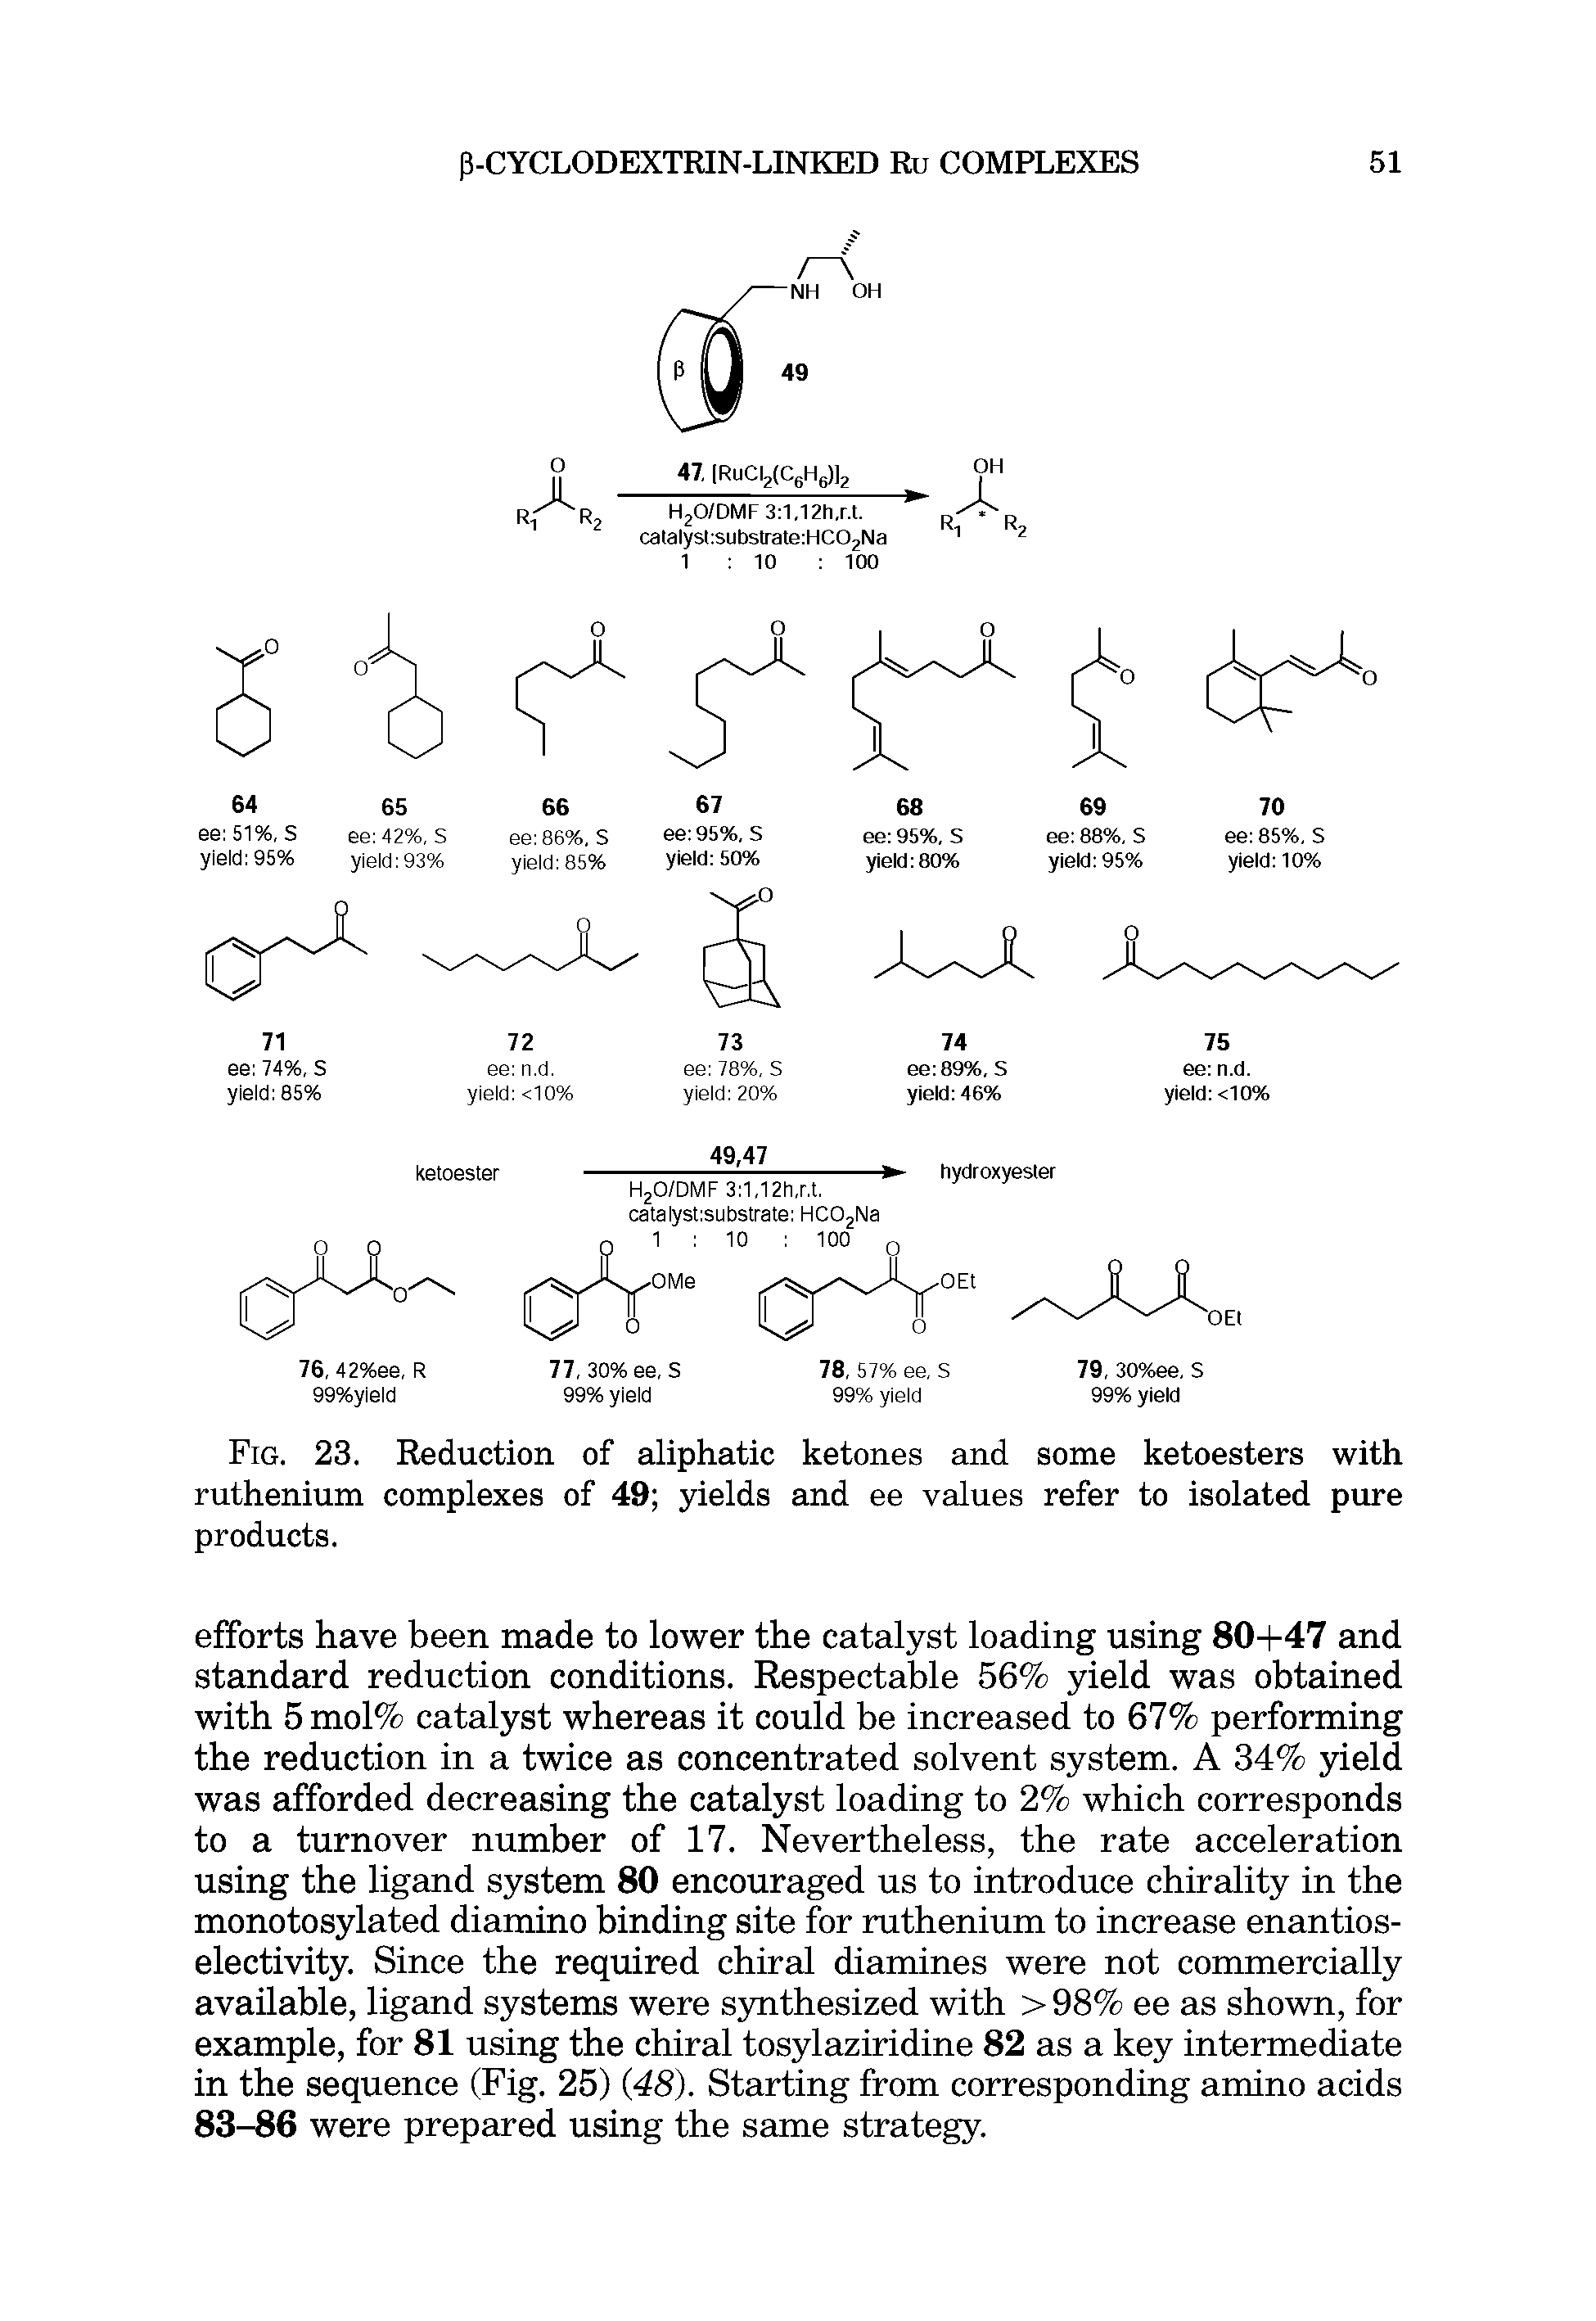 Fig. 23. Reduction of aliphatic ketones and some ketoesters with ruthenium complexes of 49 yields and ee values refer to isolated pure products.